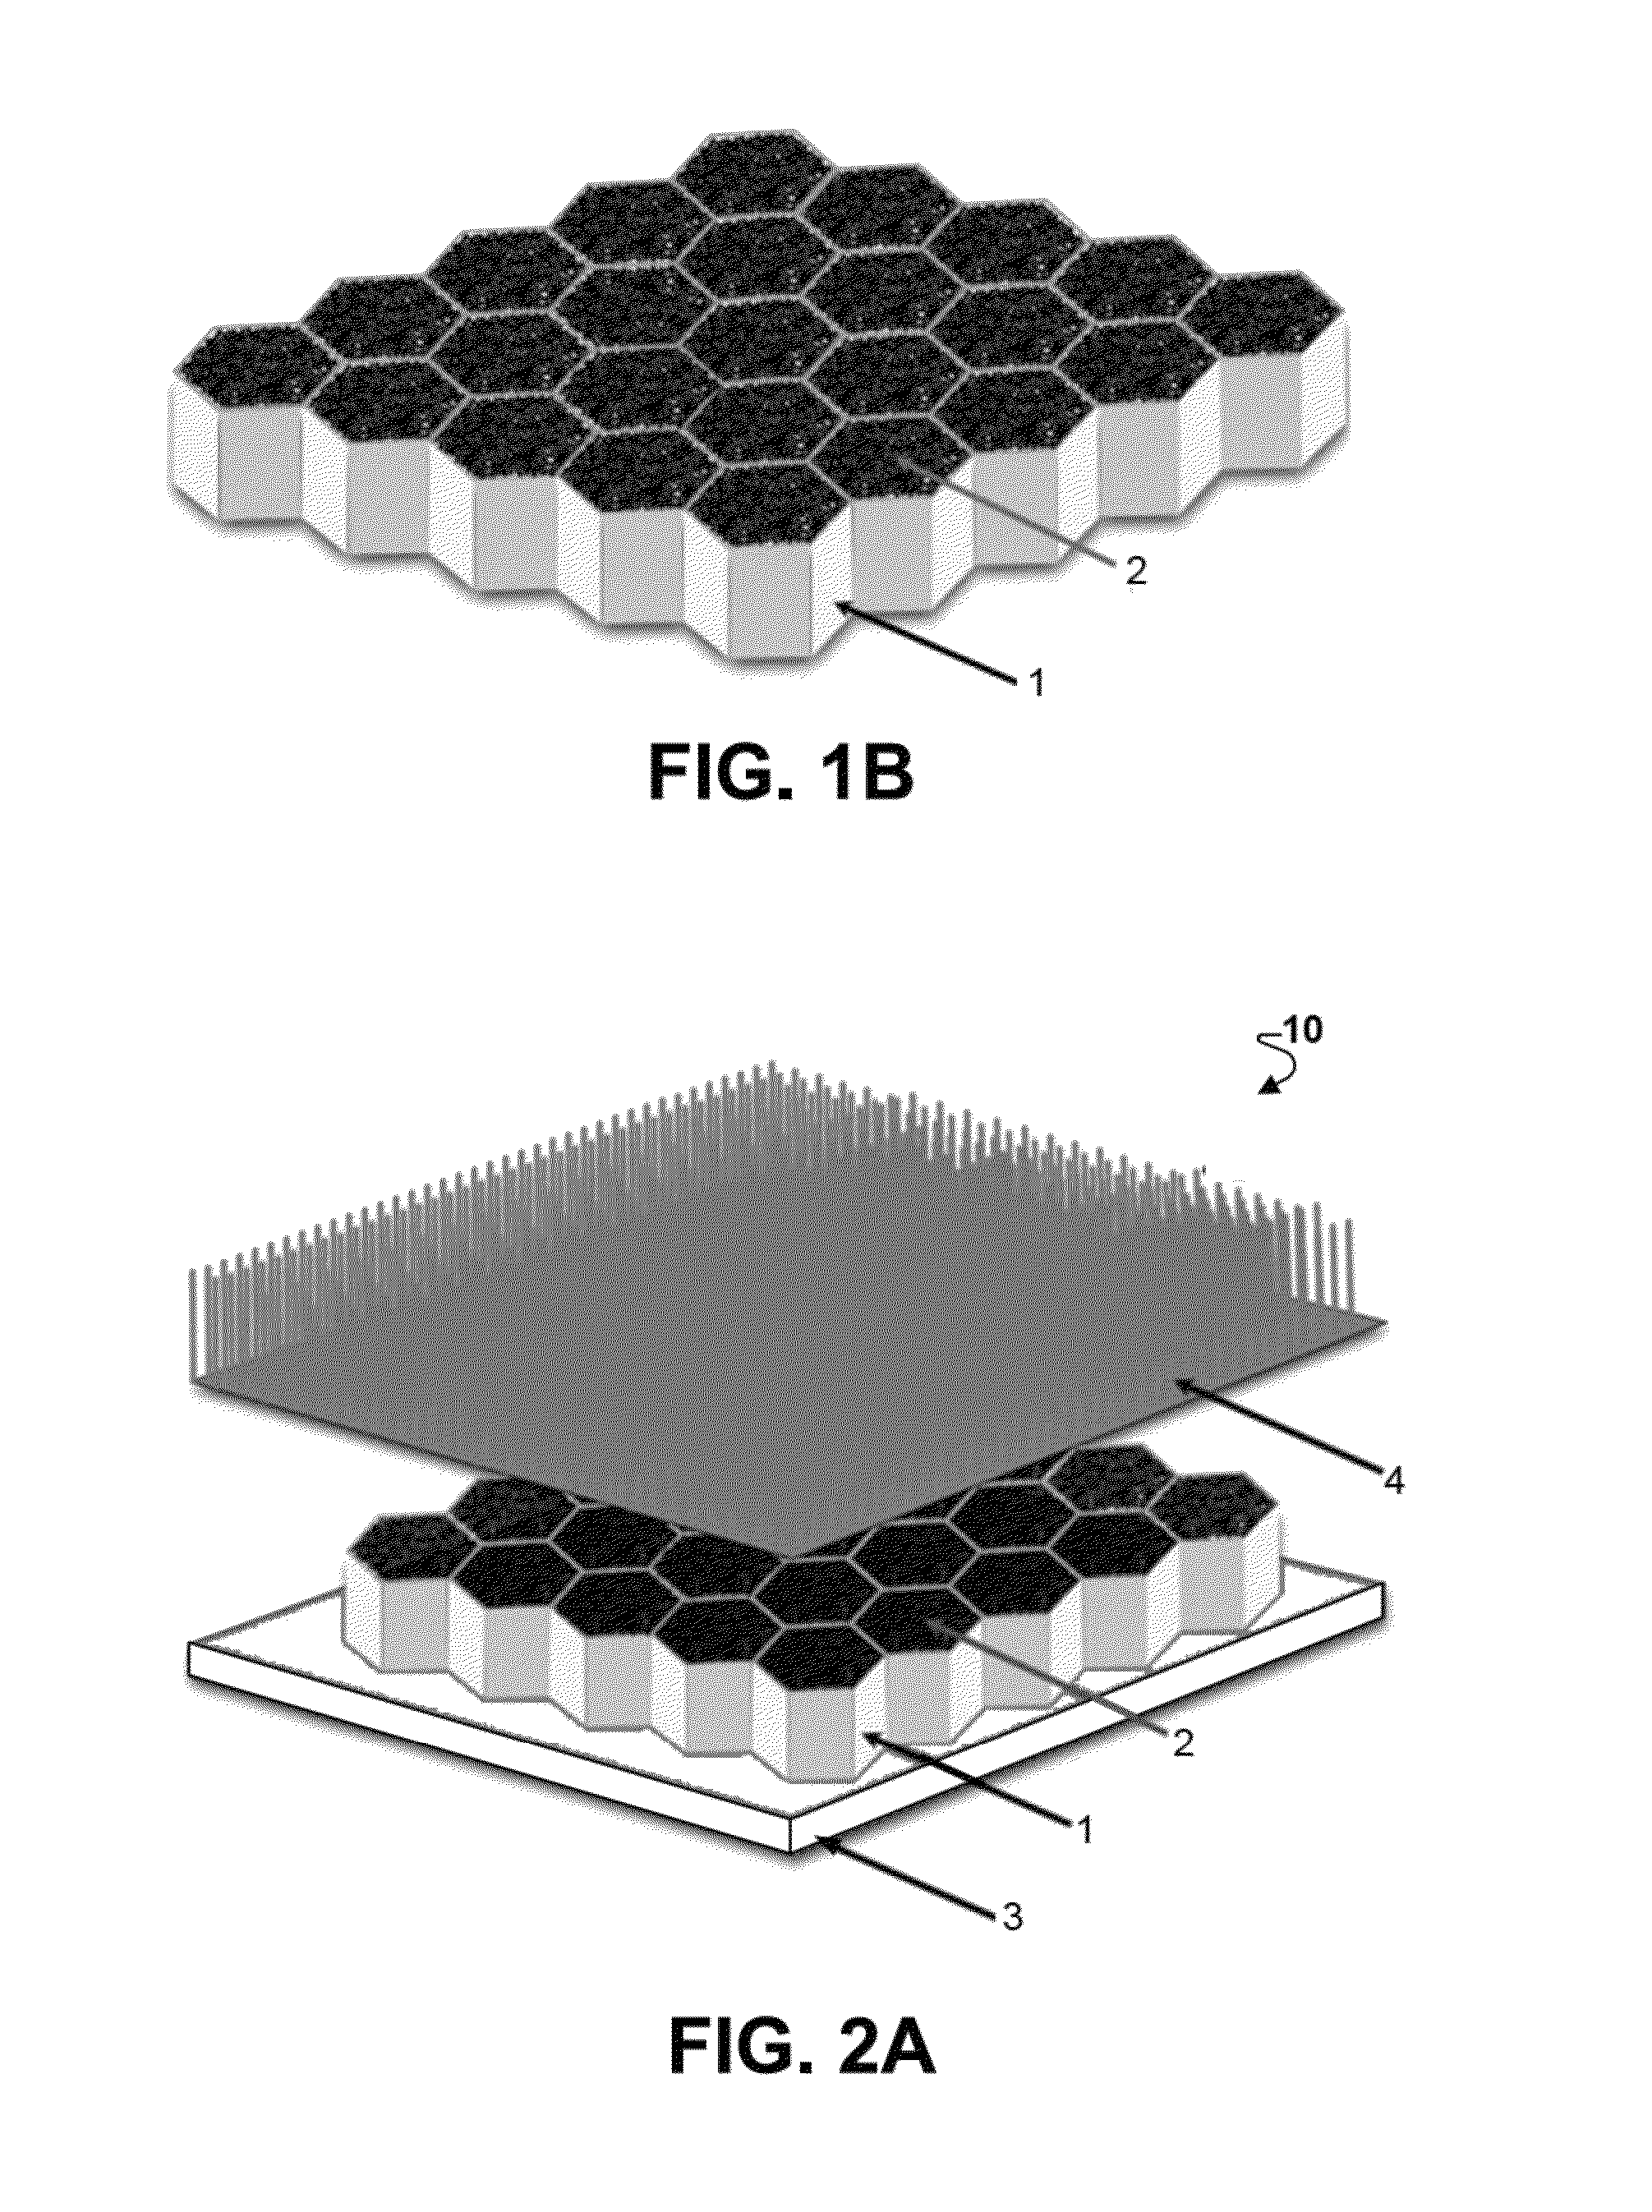 System and method for absorbing shocks impacts while providing water drainage